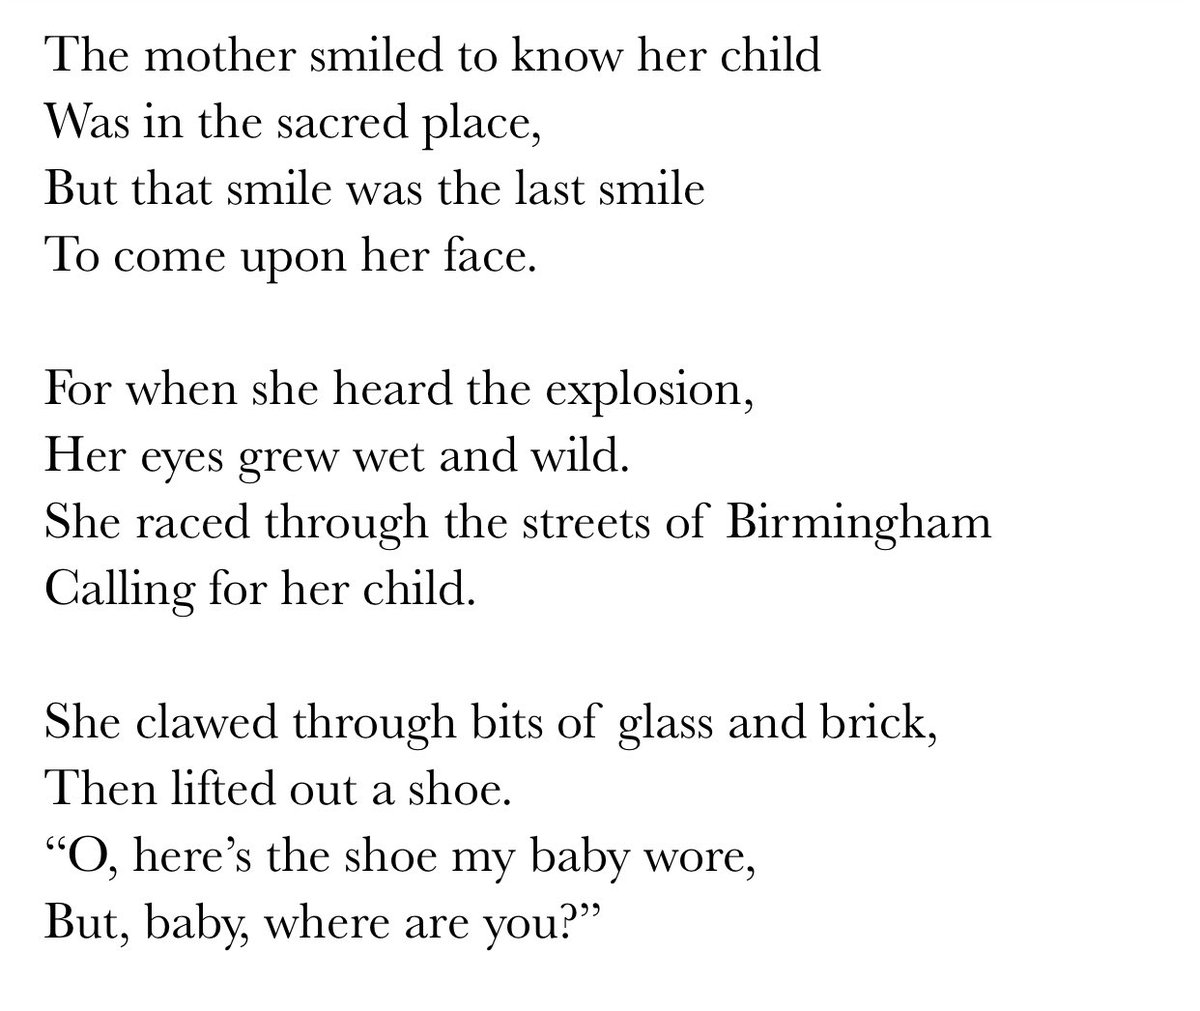 There's also a poem about the attack, called the 'Ballad of Birmingham' and it was written by Dudley Randall.